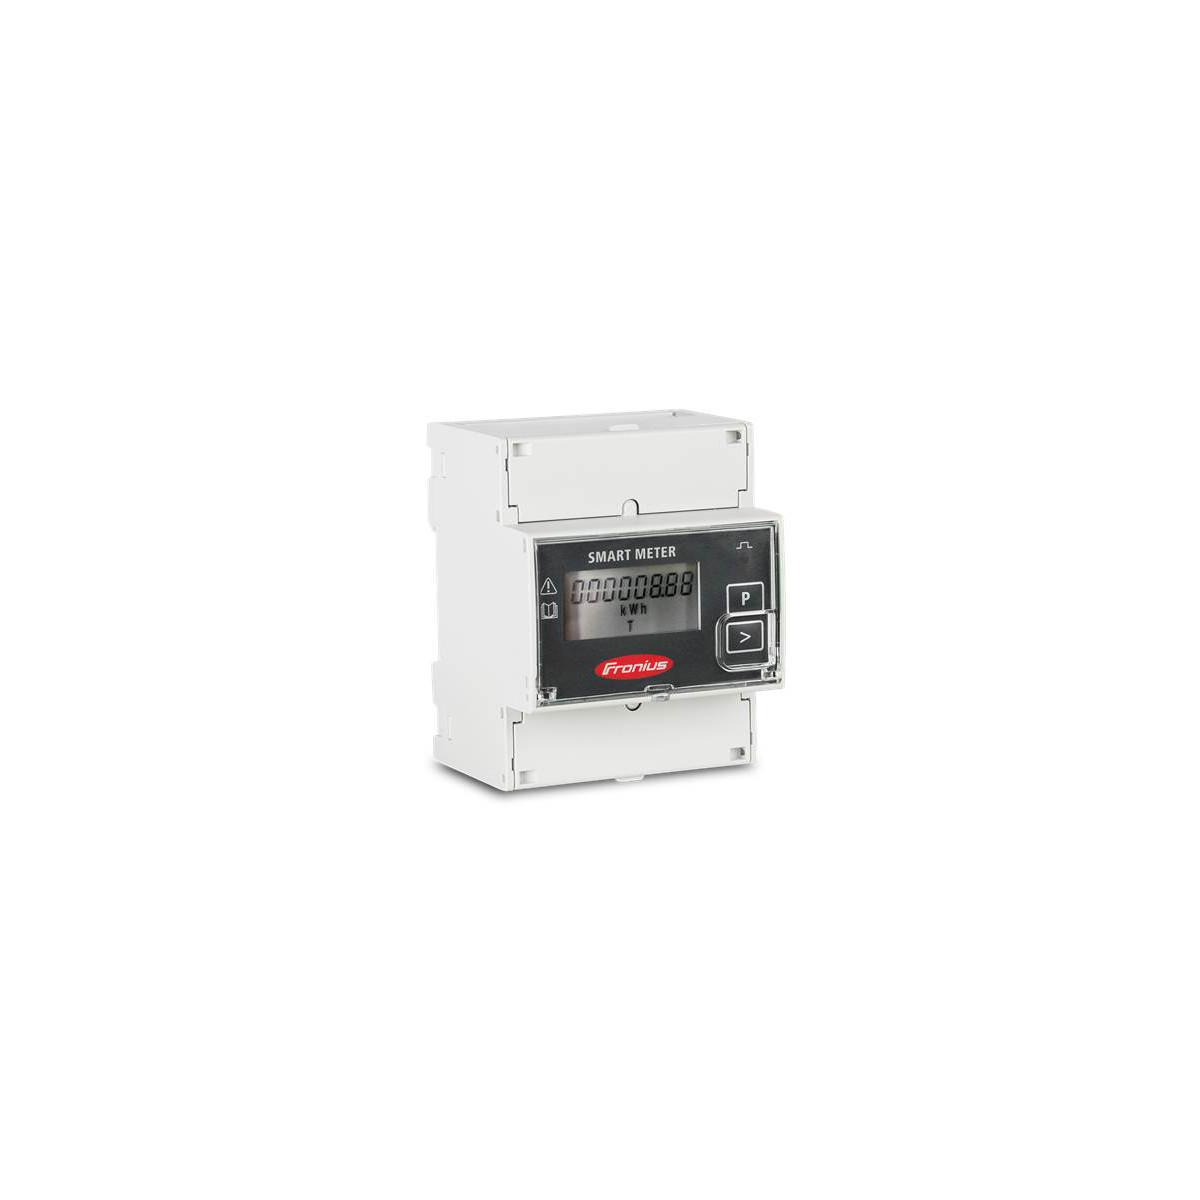 https://shop.ssp-products.at/media/image/product/8813/lg/fronius-smart-meter-63a-3-smart-meter.jpg